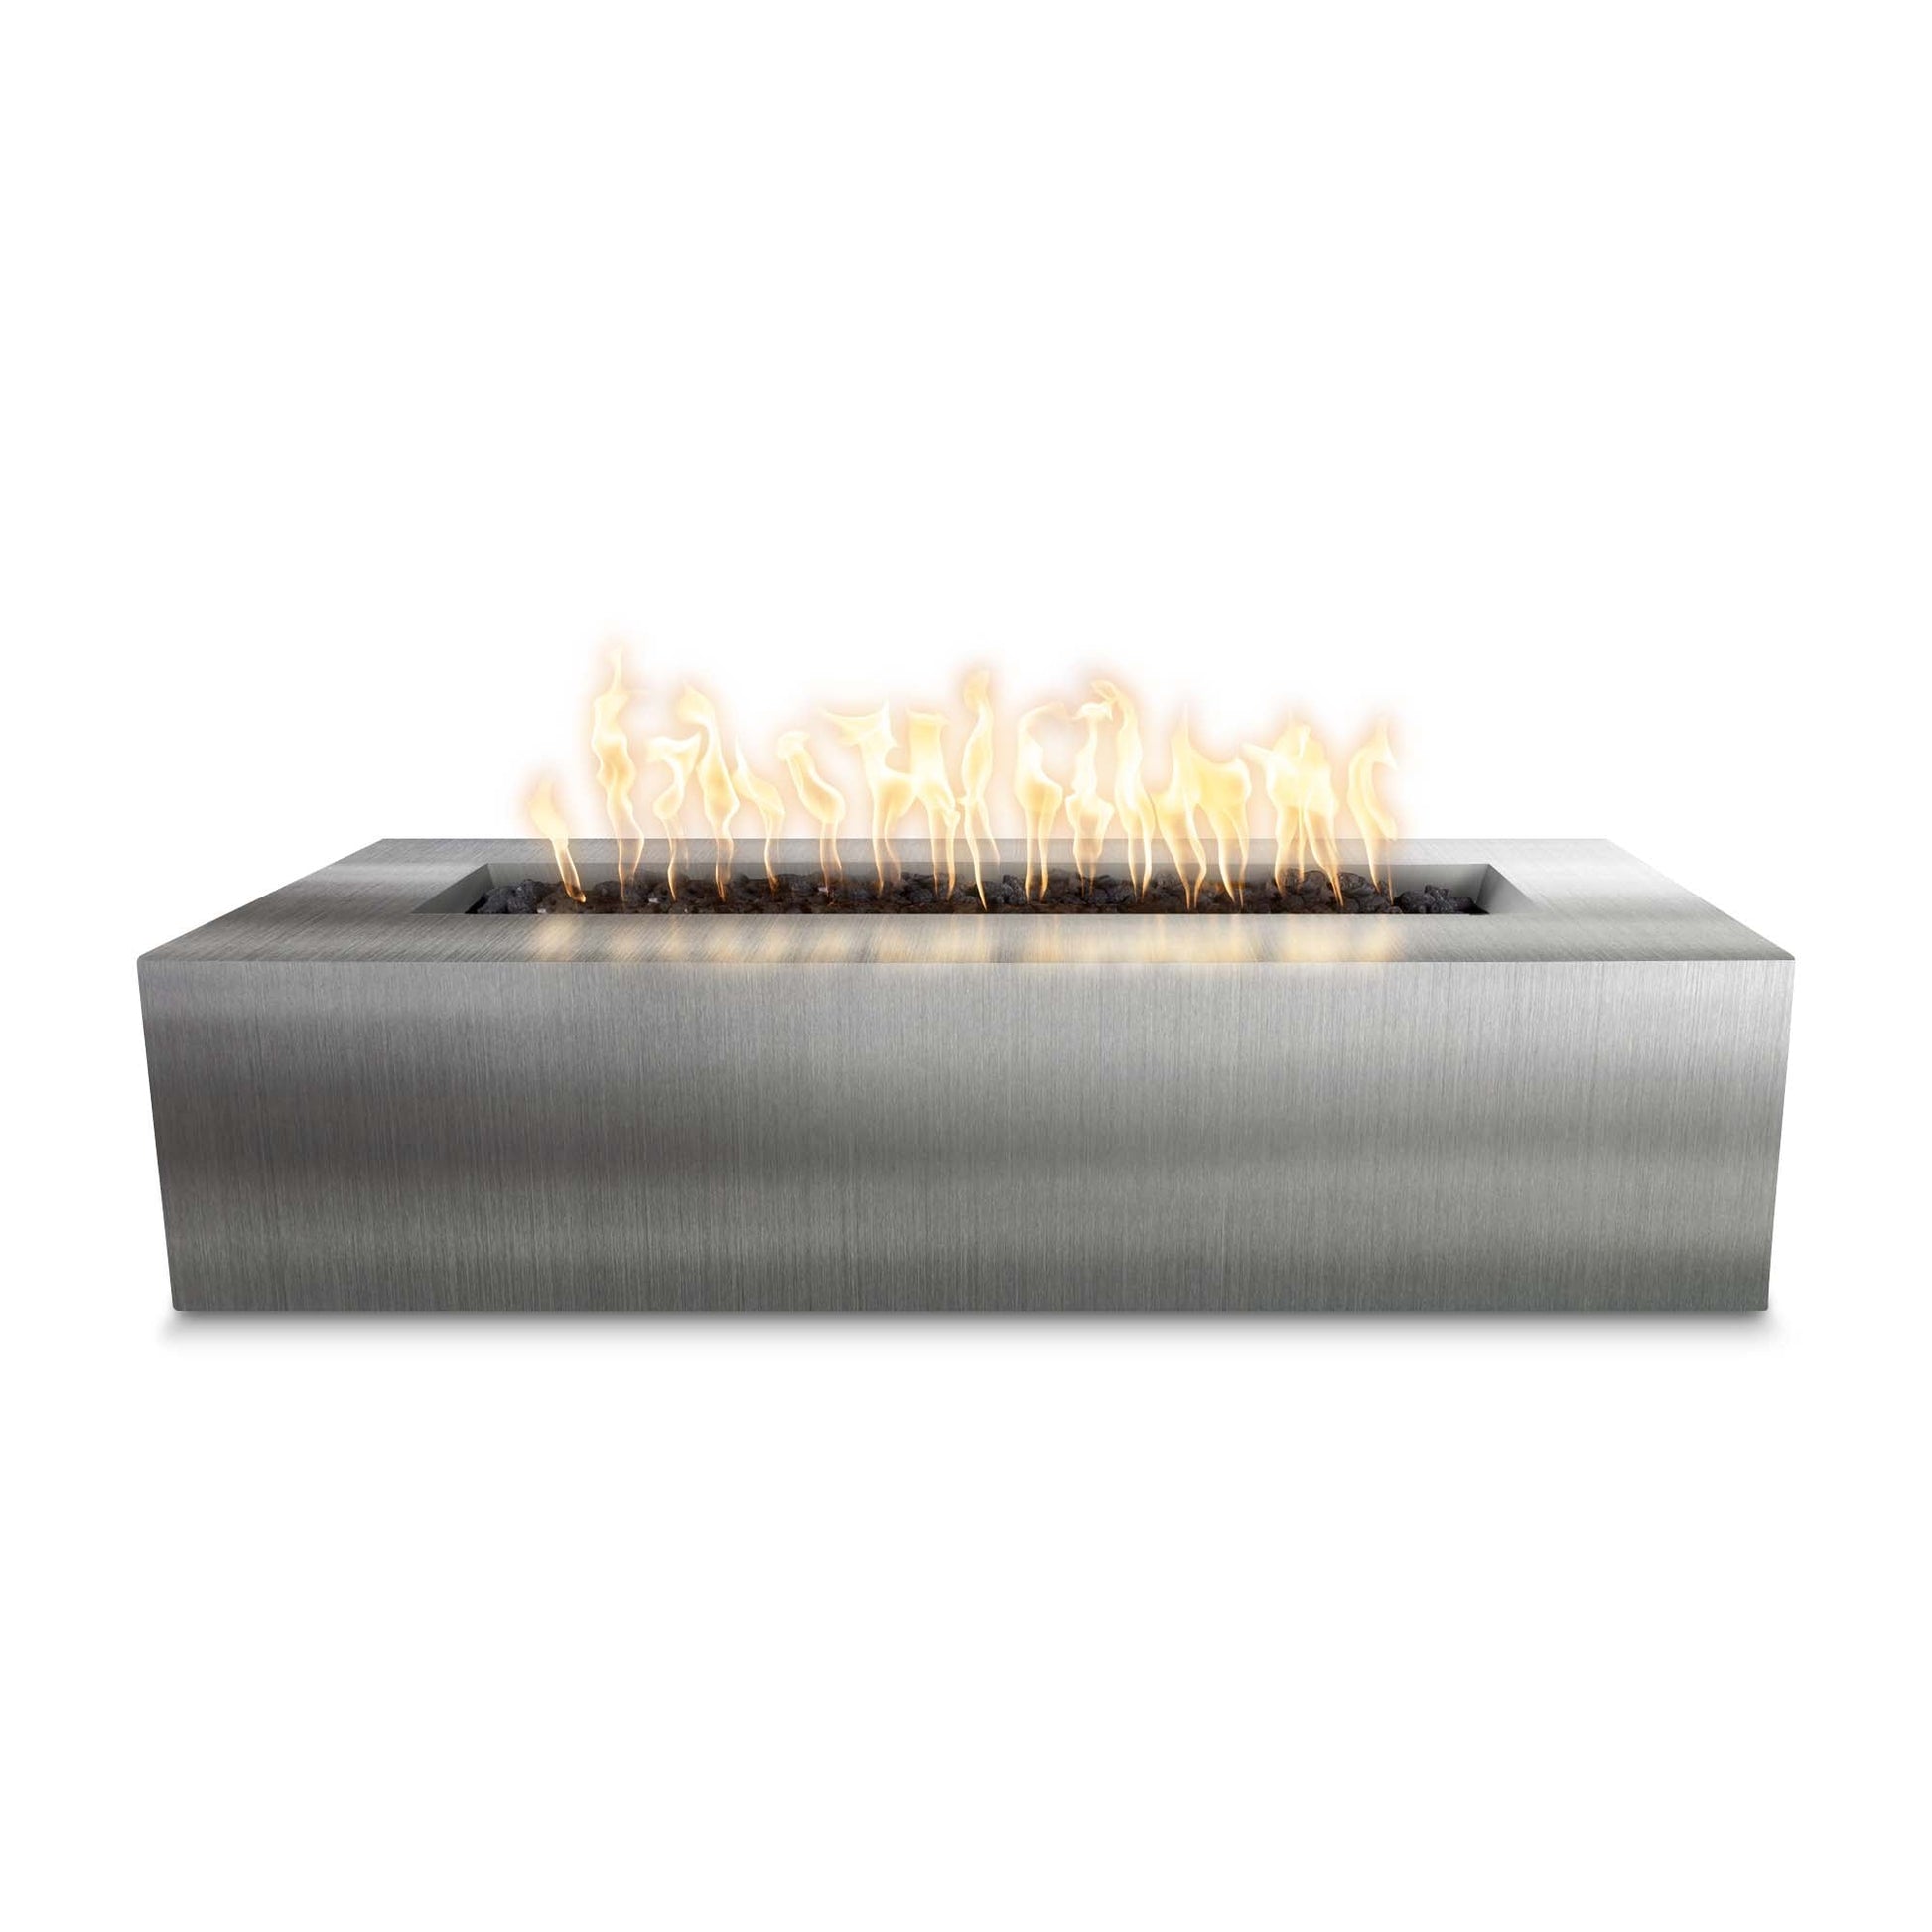 The Outdoor Plus Rectangular Regal 54" Hammered Copper Liquid Propane Fire Pit with 12V Electronic Ignition